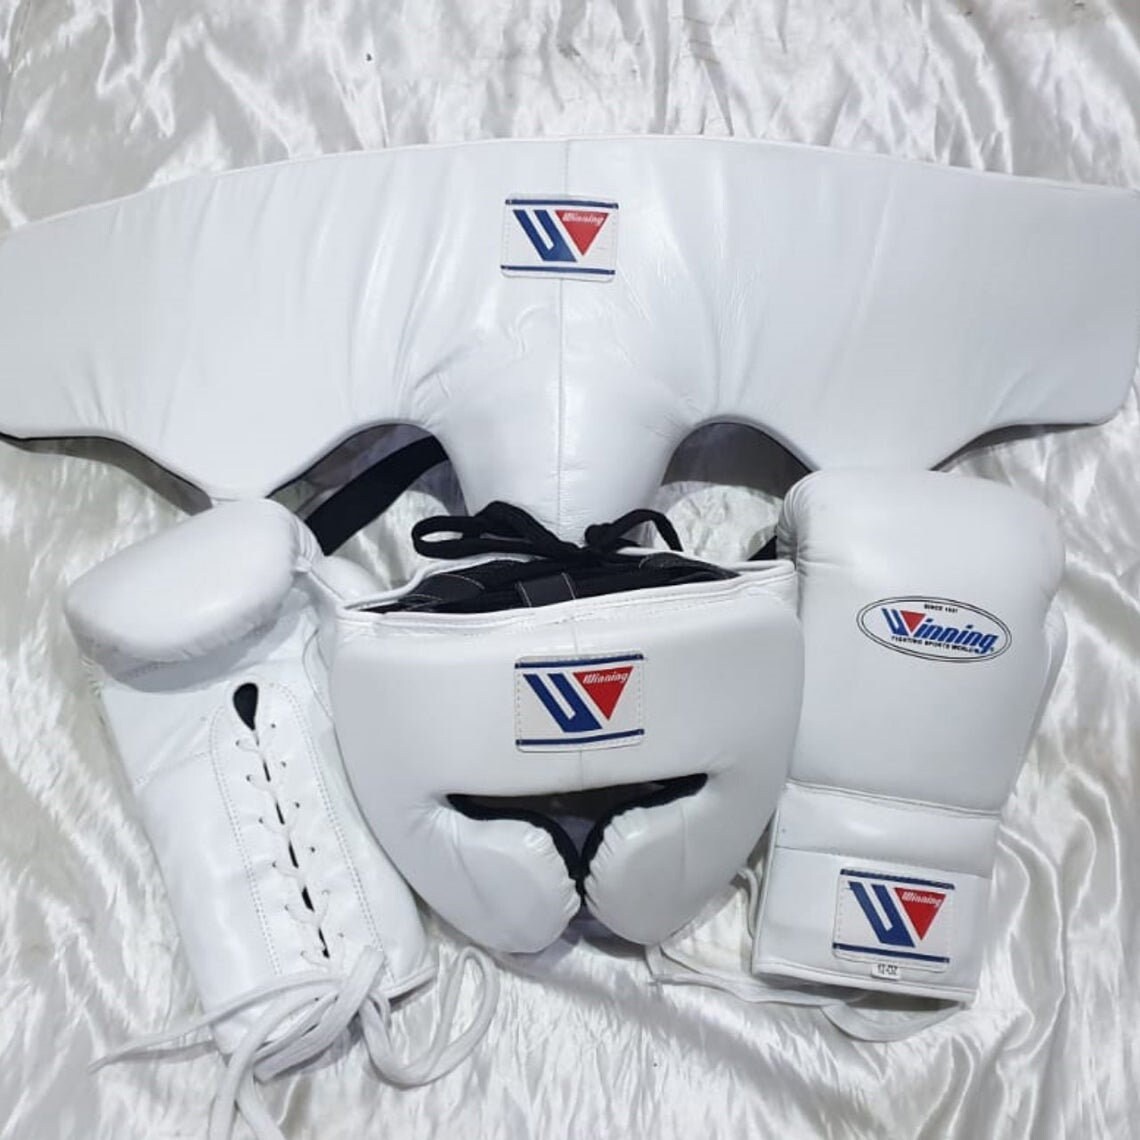 Head Gears Groin Guard 100% Real Leather Toys & Games Sports & Outdoor Recreation Martial Arts & Boxing Boxing Gloves Custom Made W1NNING BOXING SETS Boxing Gloves 